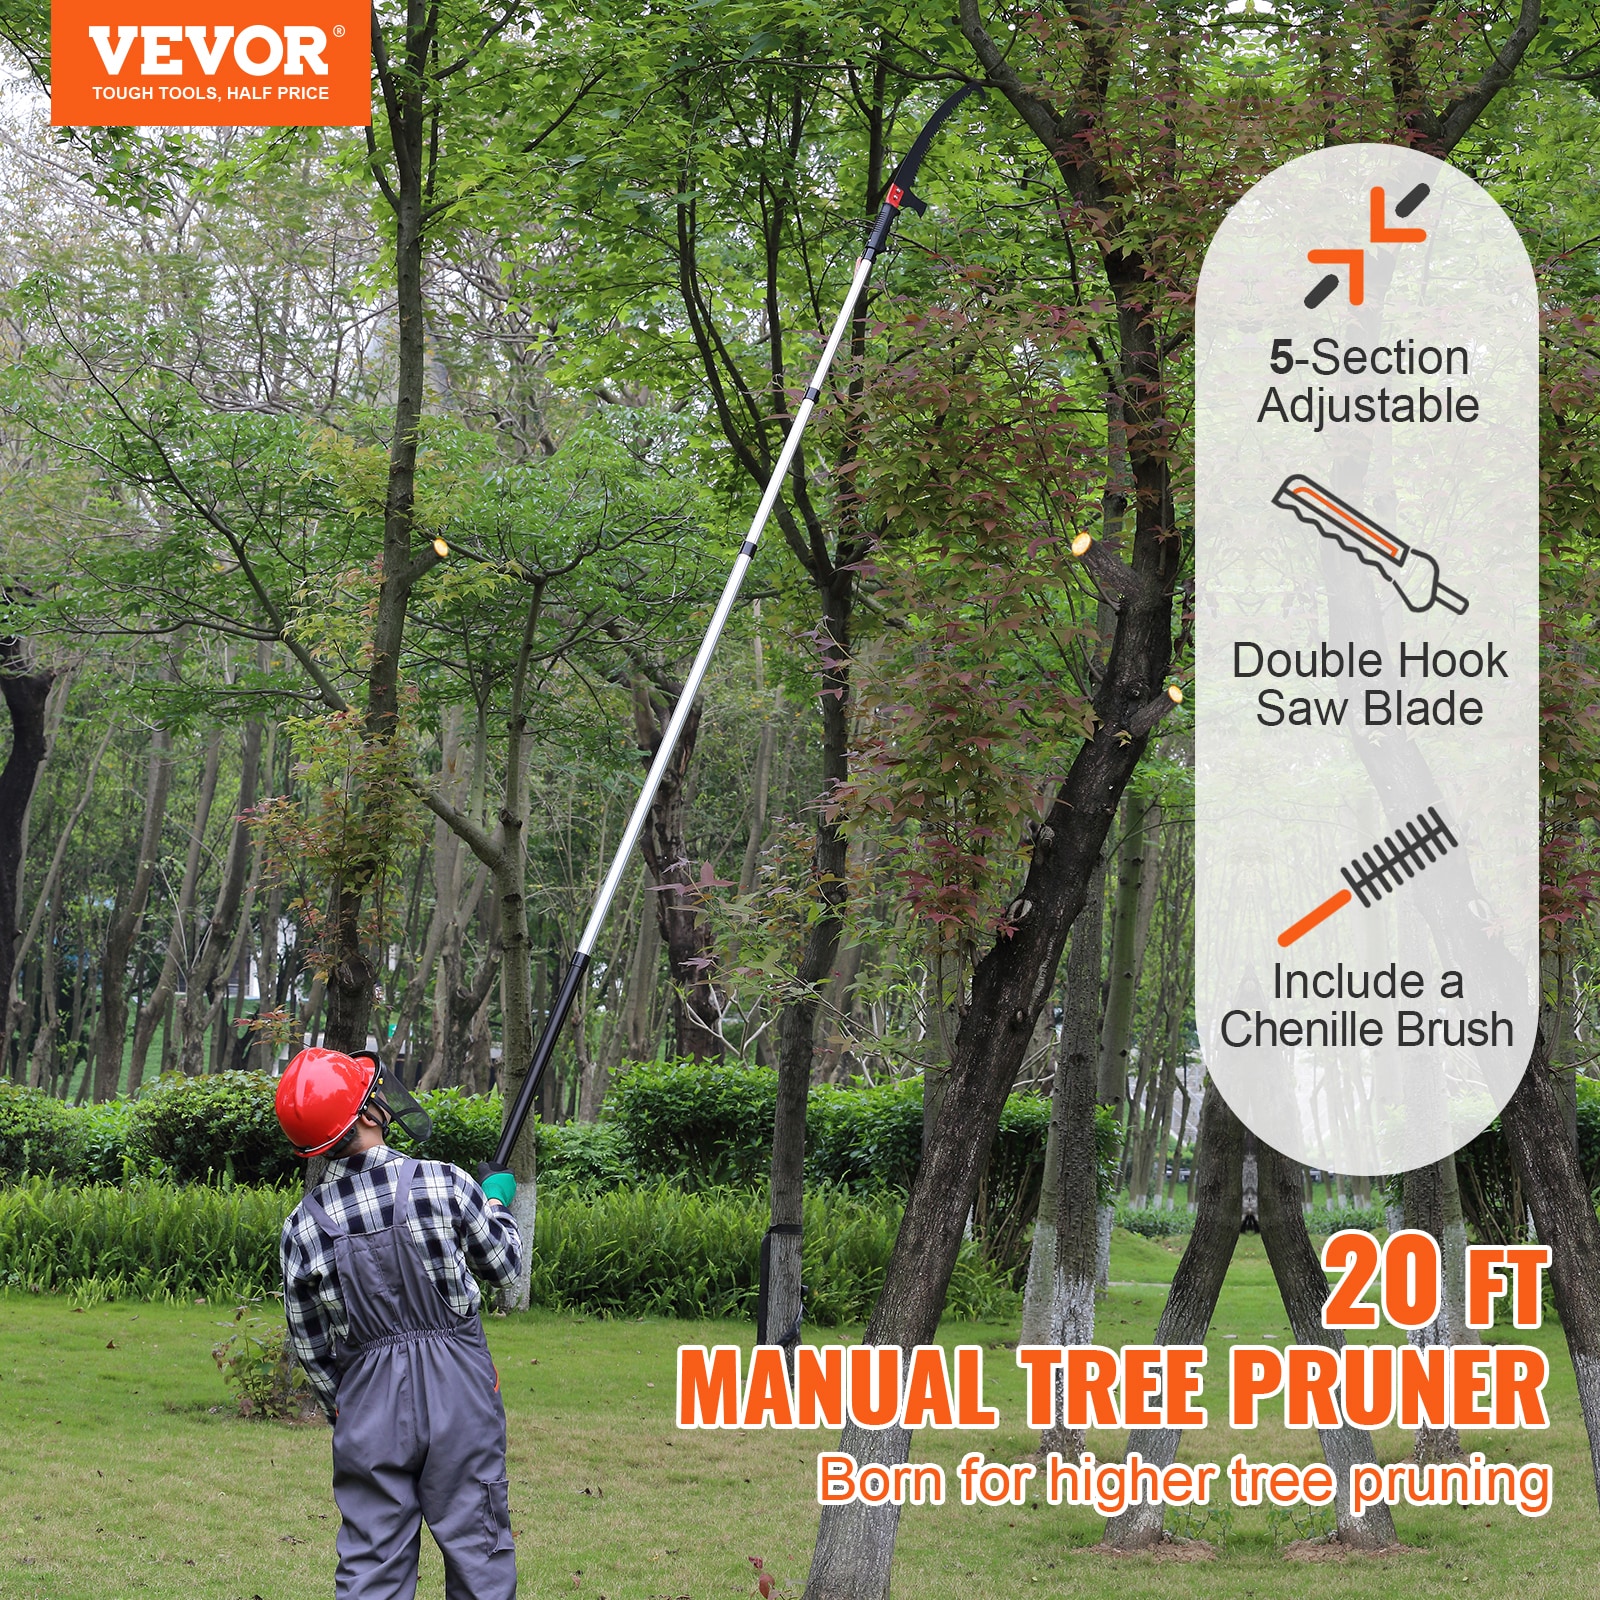 VEVOR 20 FT Manual tree pruner Telescoping Pole Pruning Saw in the